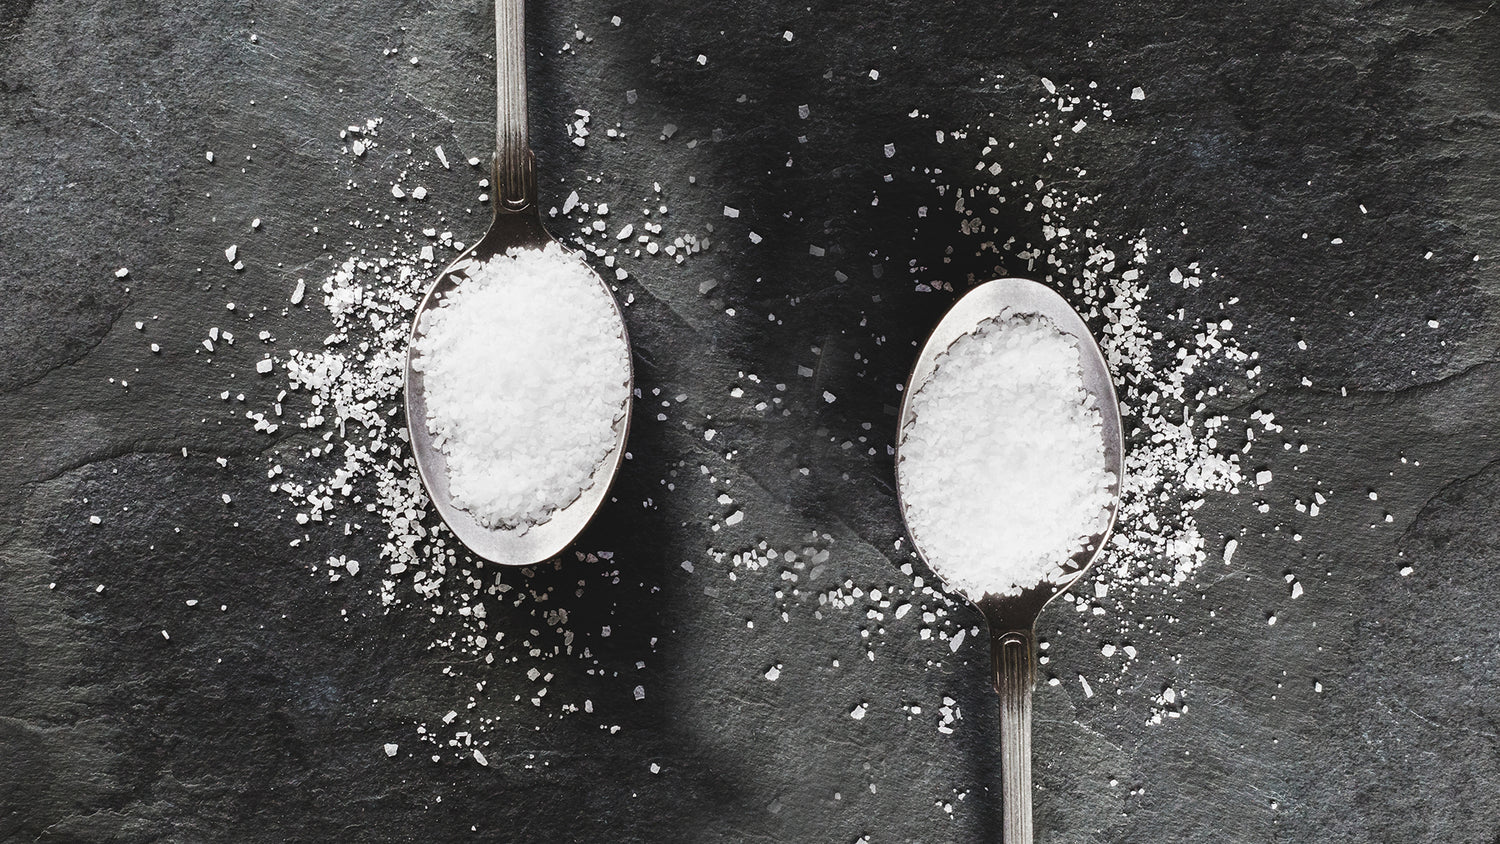 two teaspoons with white salt crystals in them on slate background. Sprinkling of salt around the spoons.